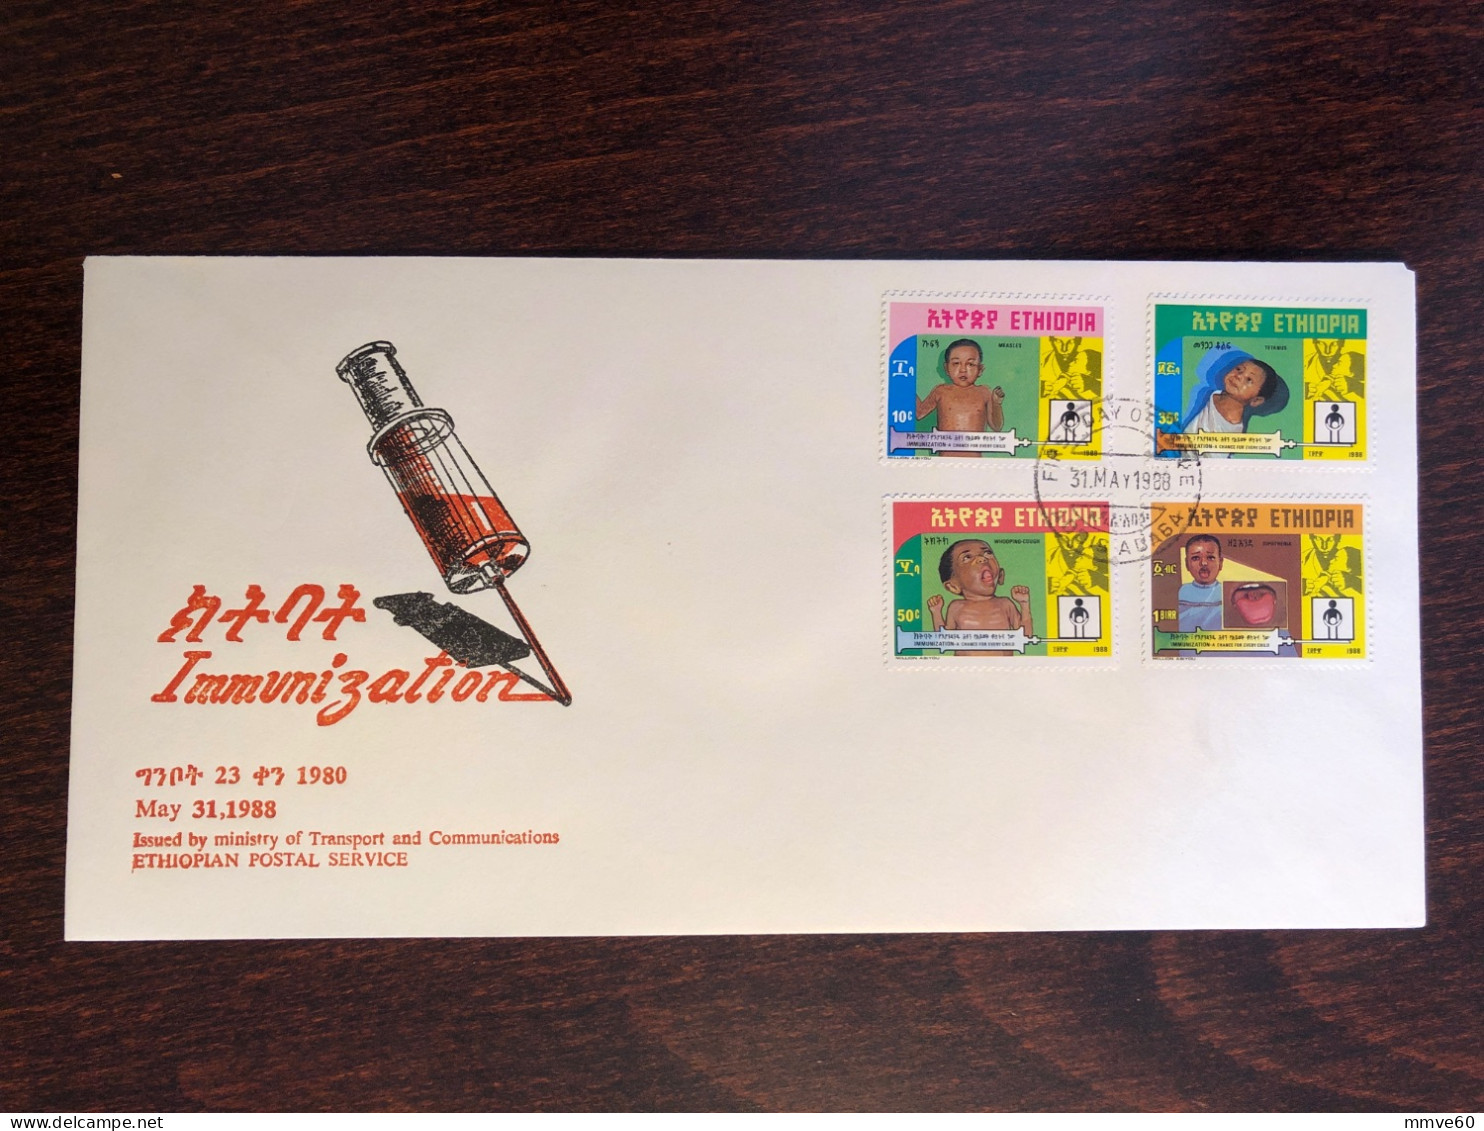 ETHIOPIA FDC COVER 1988 YEAR IMMUNIZATION - MEASLES, TETANUS, DIPHTHERIA, WHOOPING COUGH HEALTH MEDICINE STAMPS - Etiopía